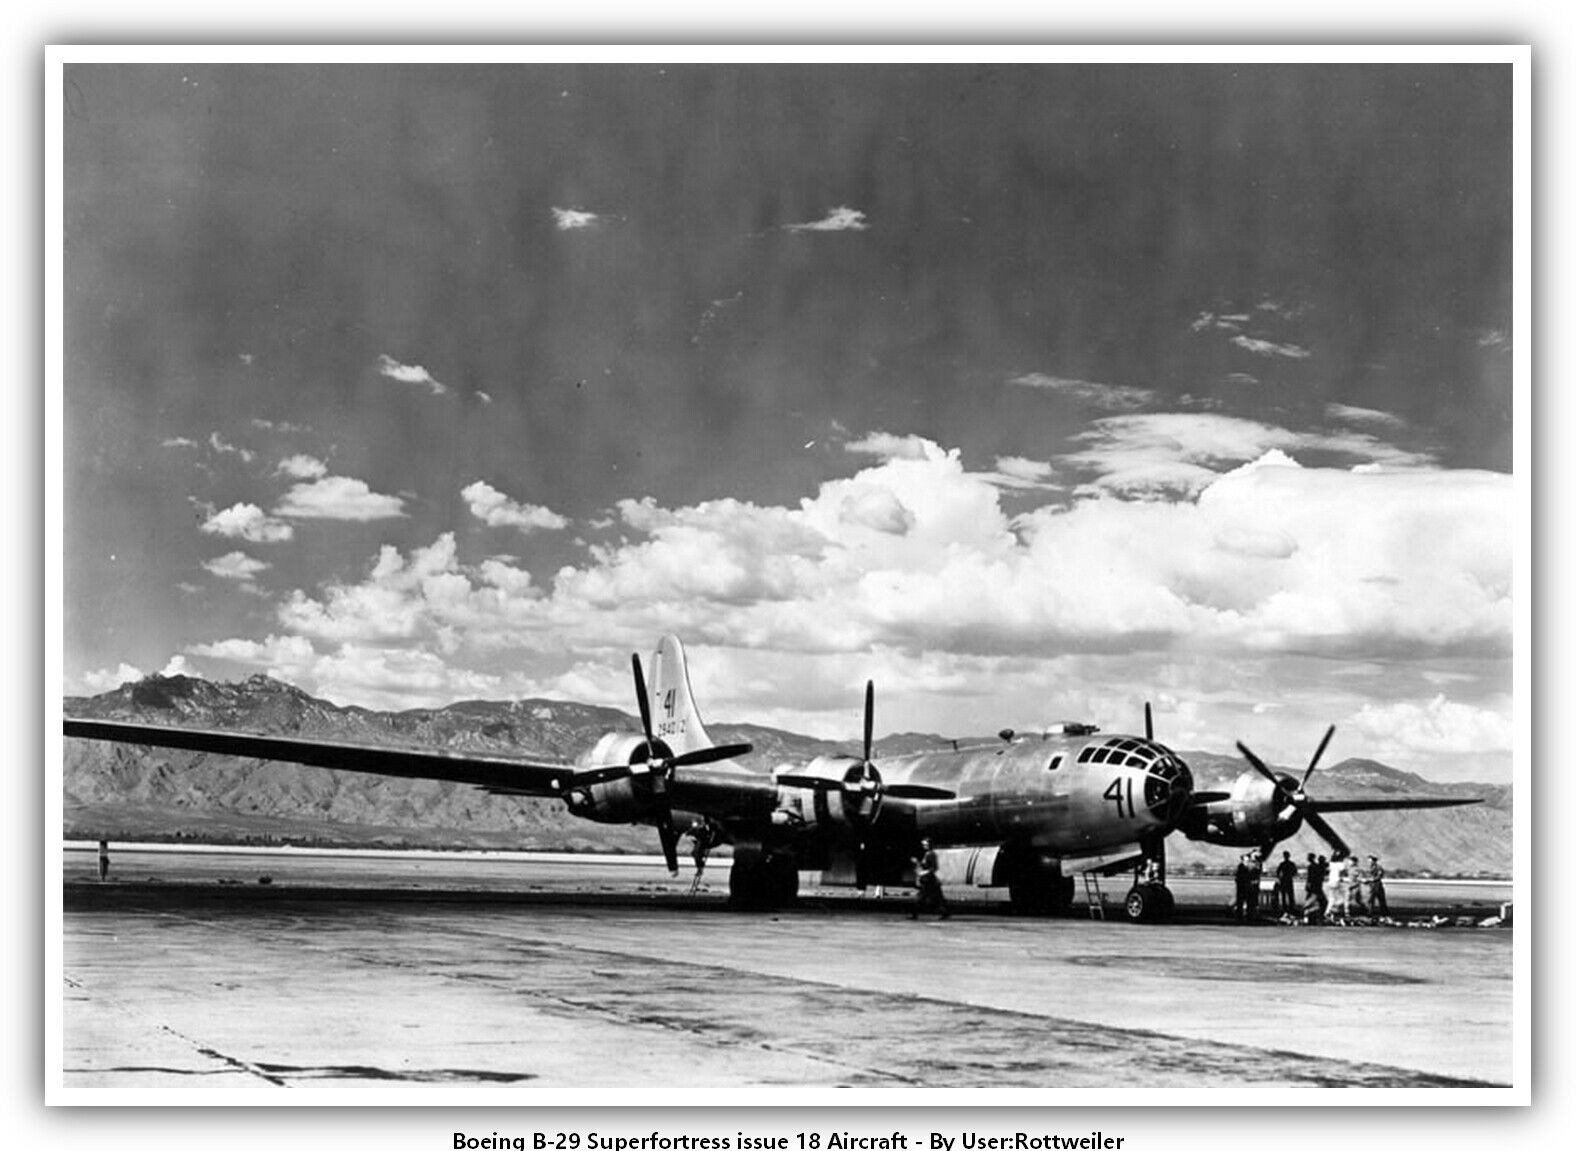 Boeing B-29 Superfortress issue 18 Aircraft